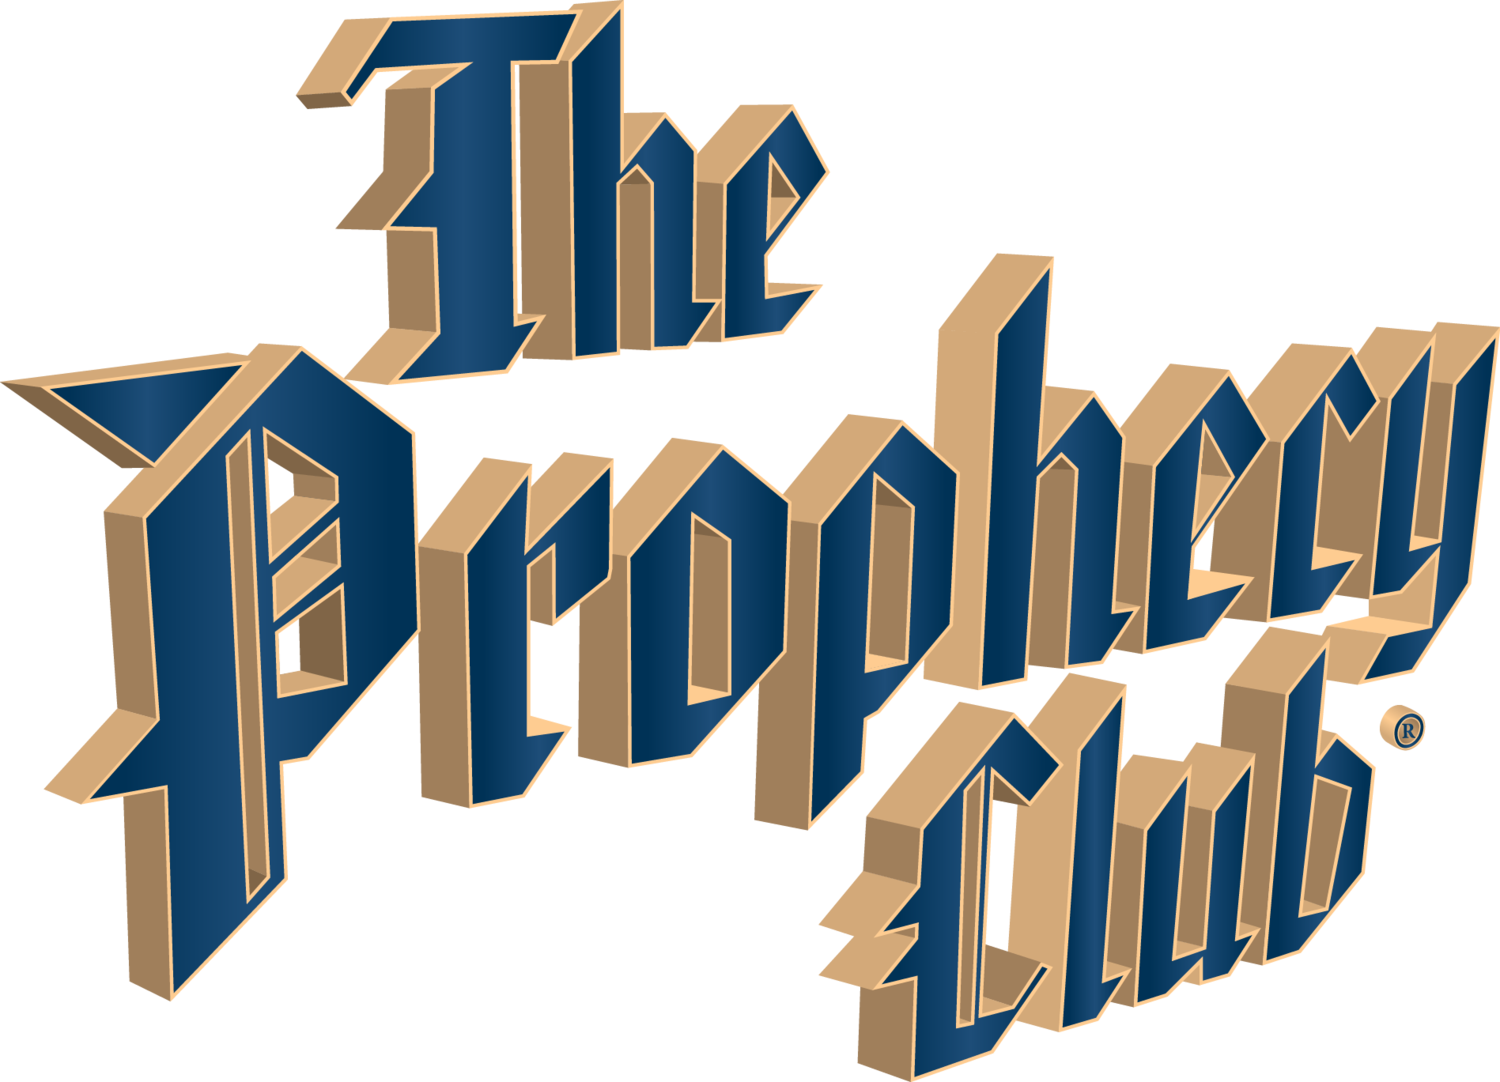 THE PROPHECY CLUB